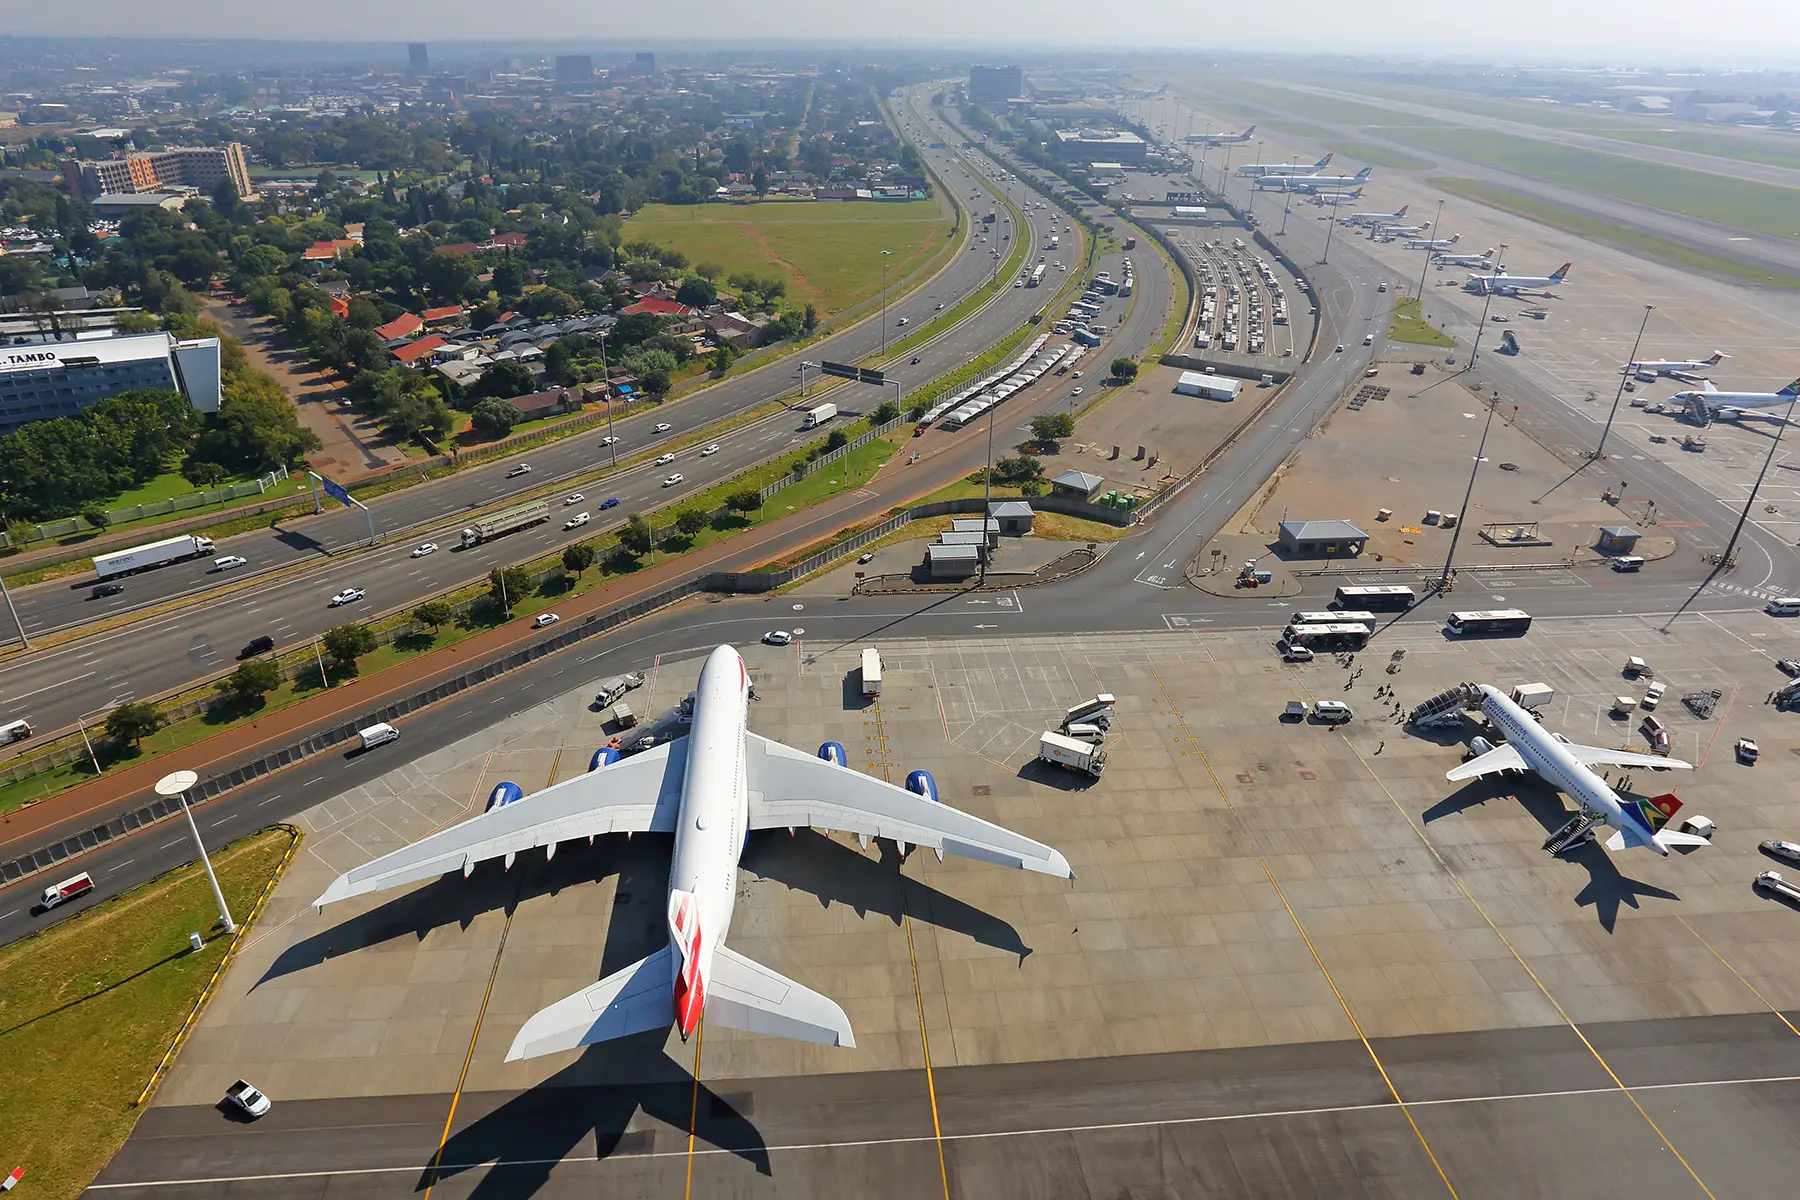 planes on the runway at Johannesburg's OR Tambo airport